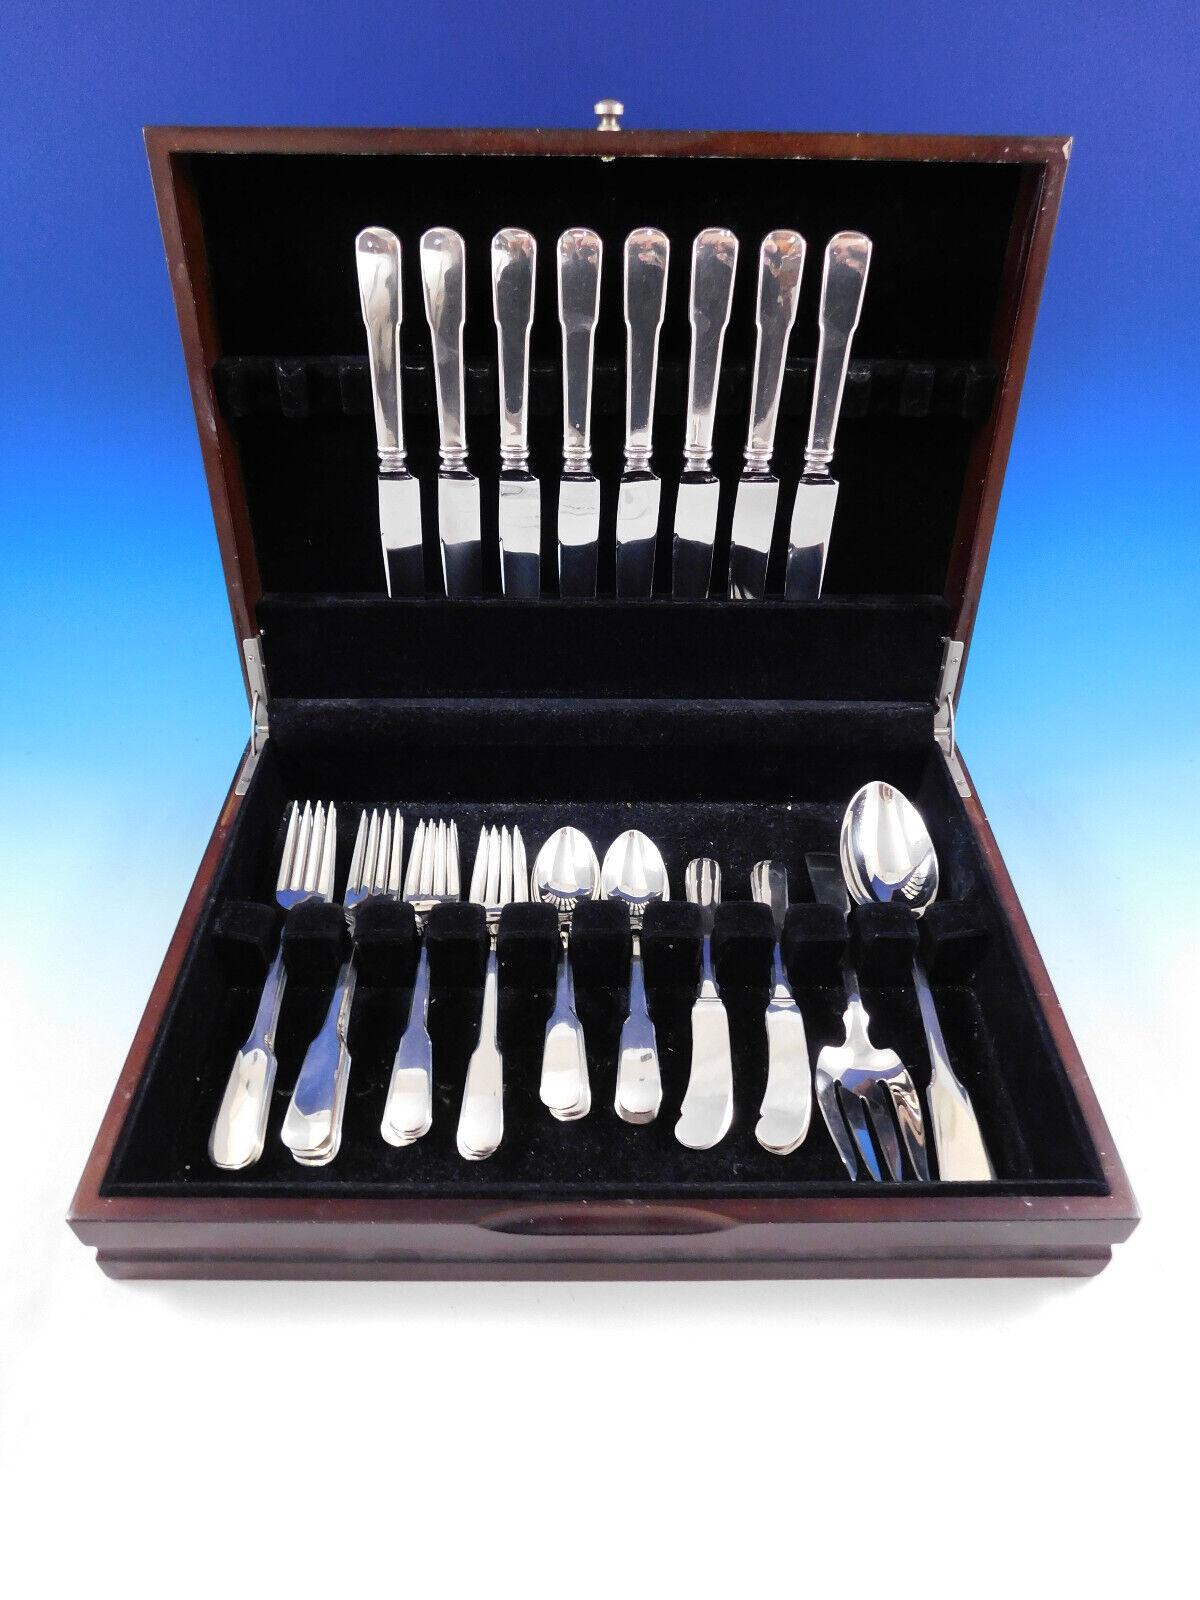 Colonial Fiddle by Watson sterling silver Flatware set, 42 pieces. This set features a classic, timeless, unadorned fiddle shaped handle and includes:


8 knives, 9